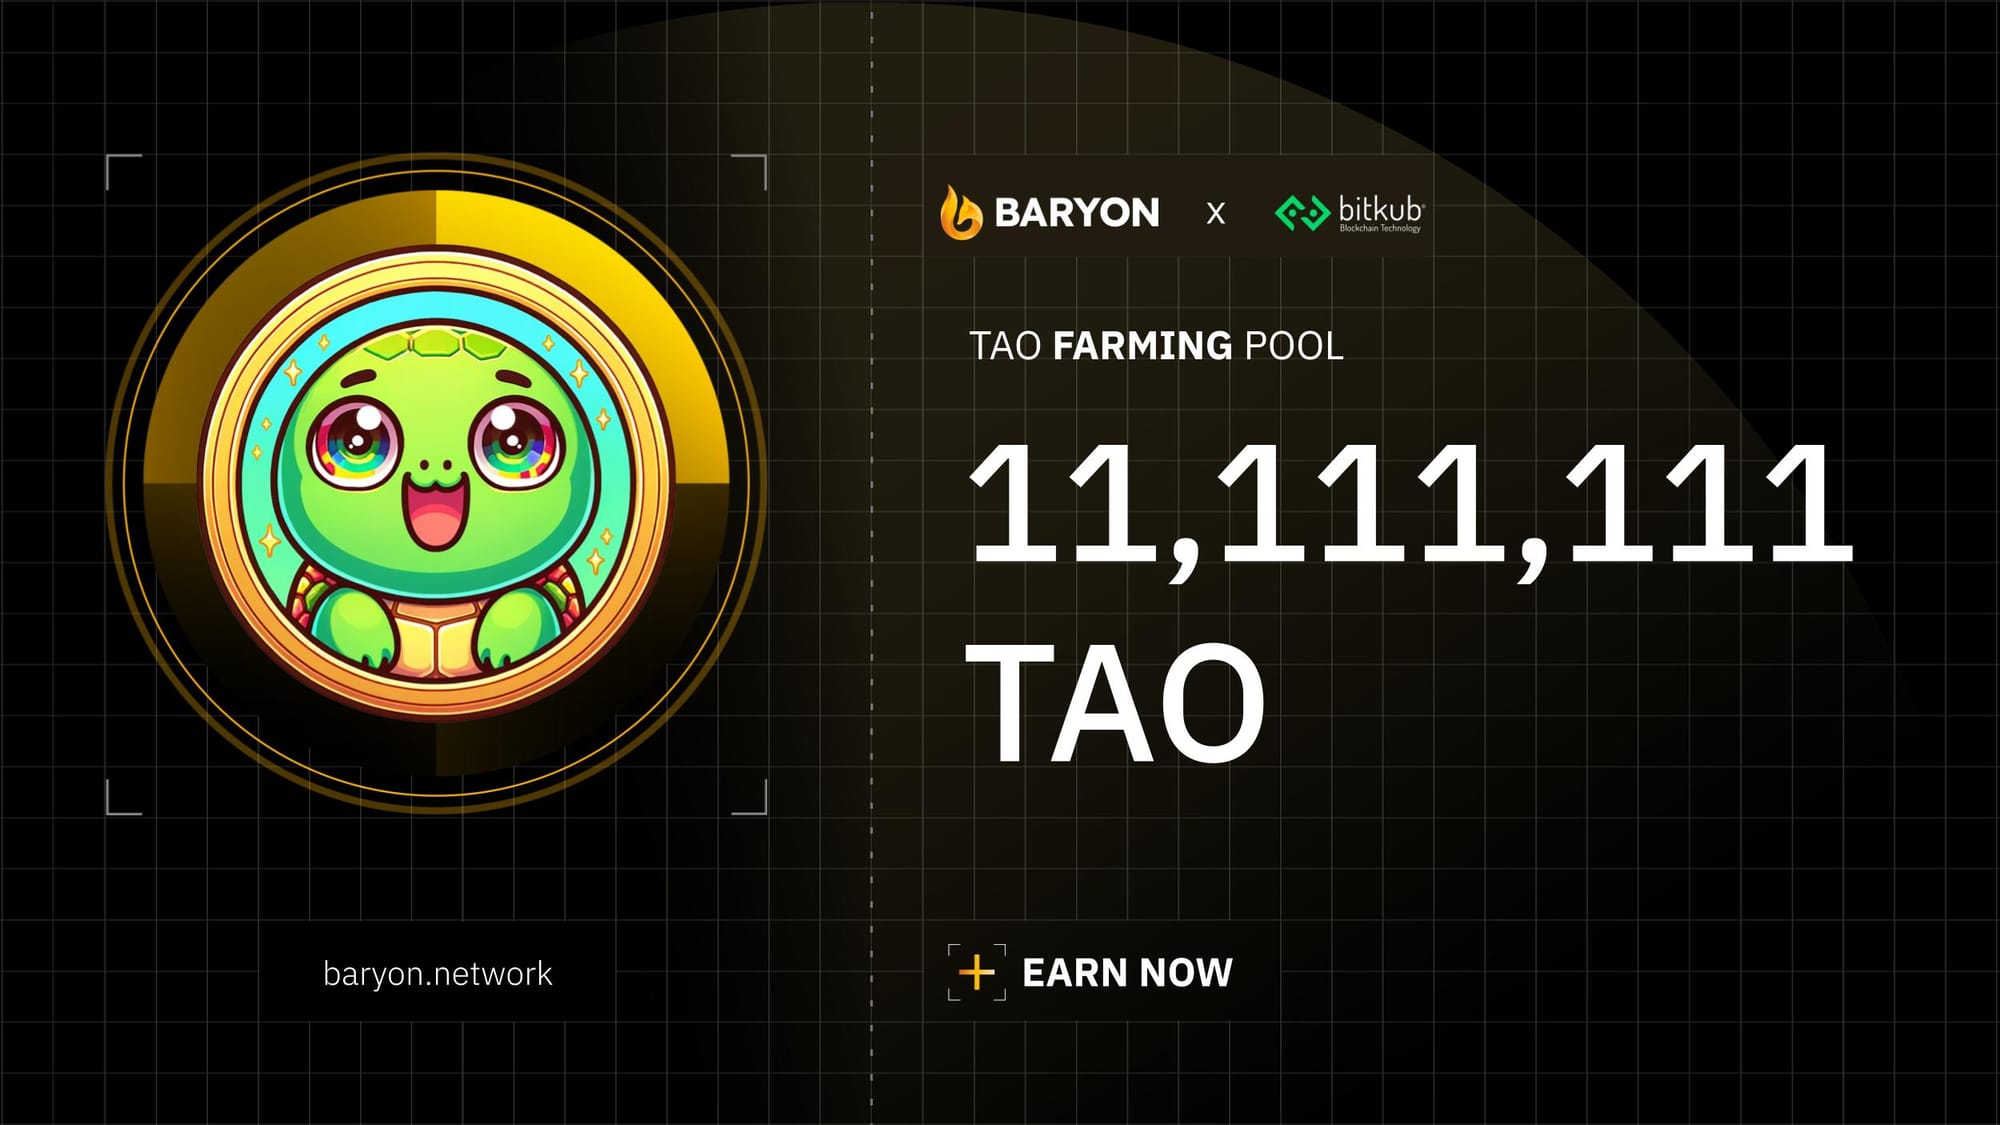 TAO Farming Pool is now live on Baryon, offering enticing rewards totaling 11,111,111 TAO